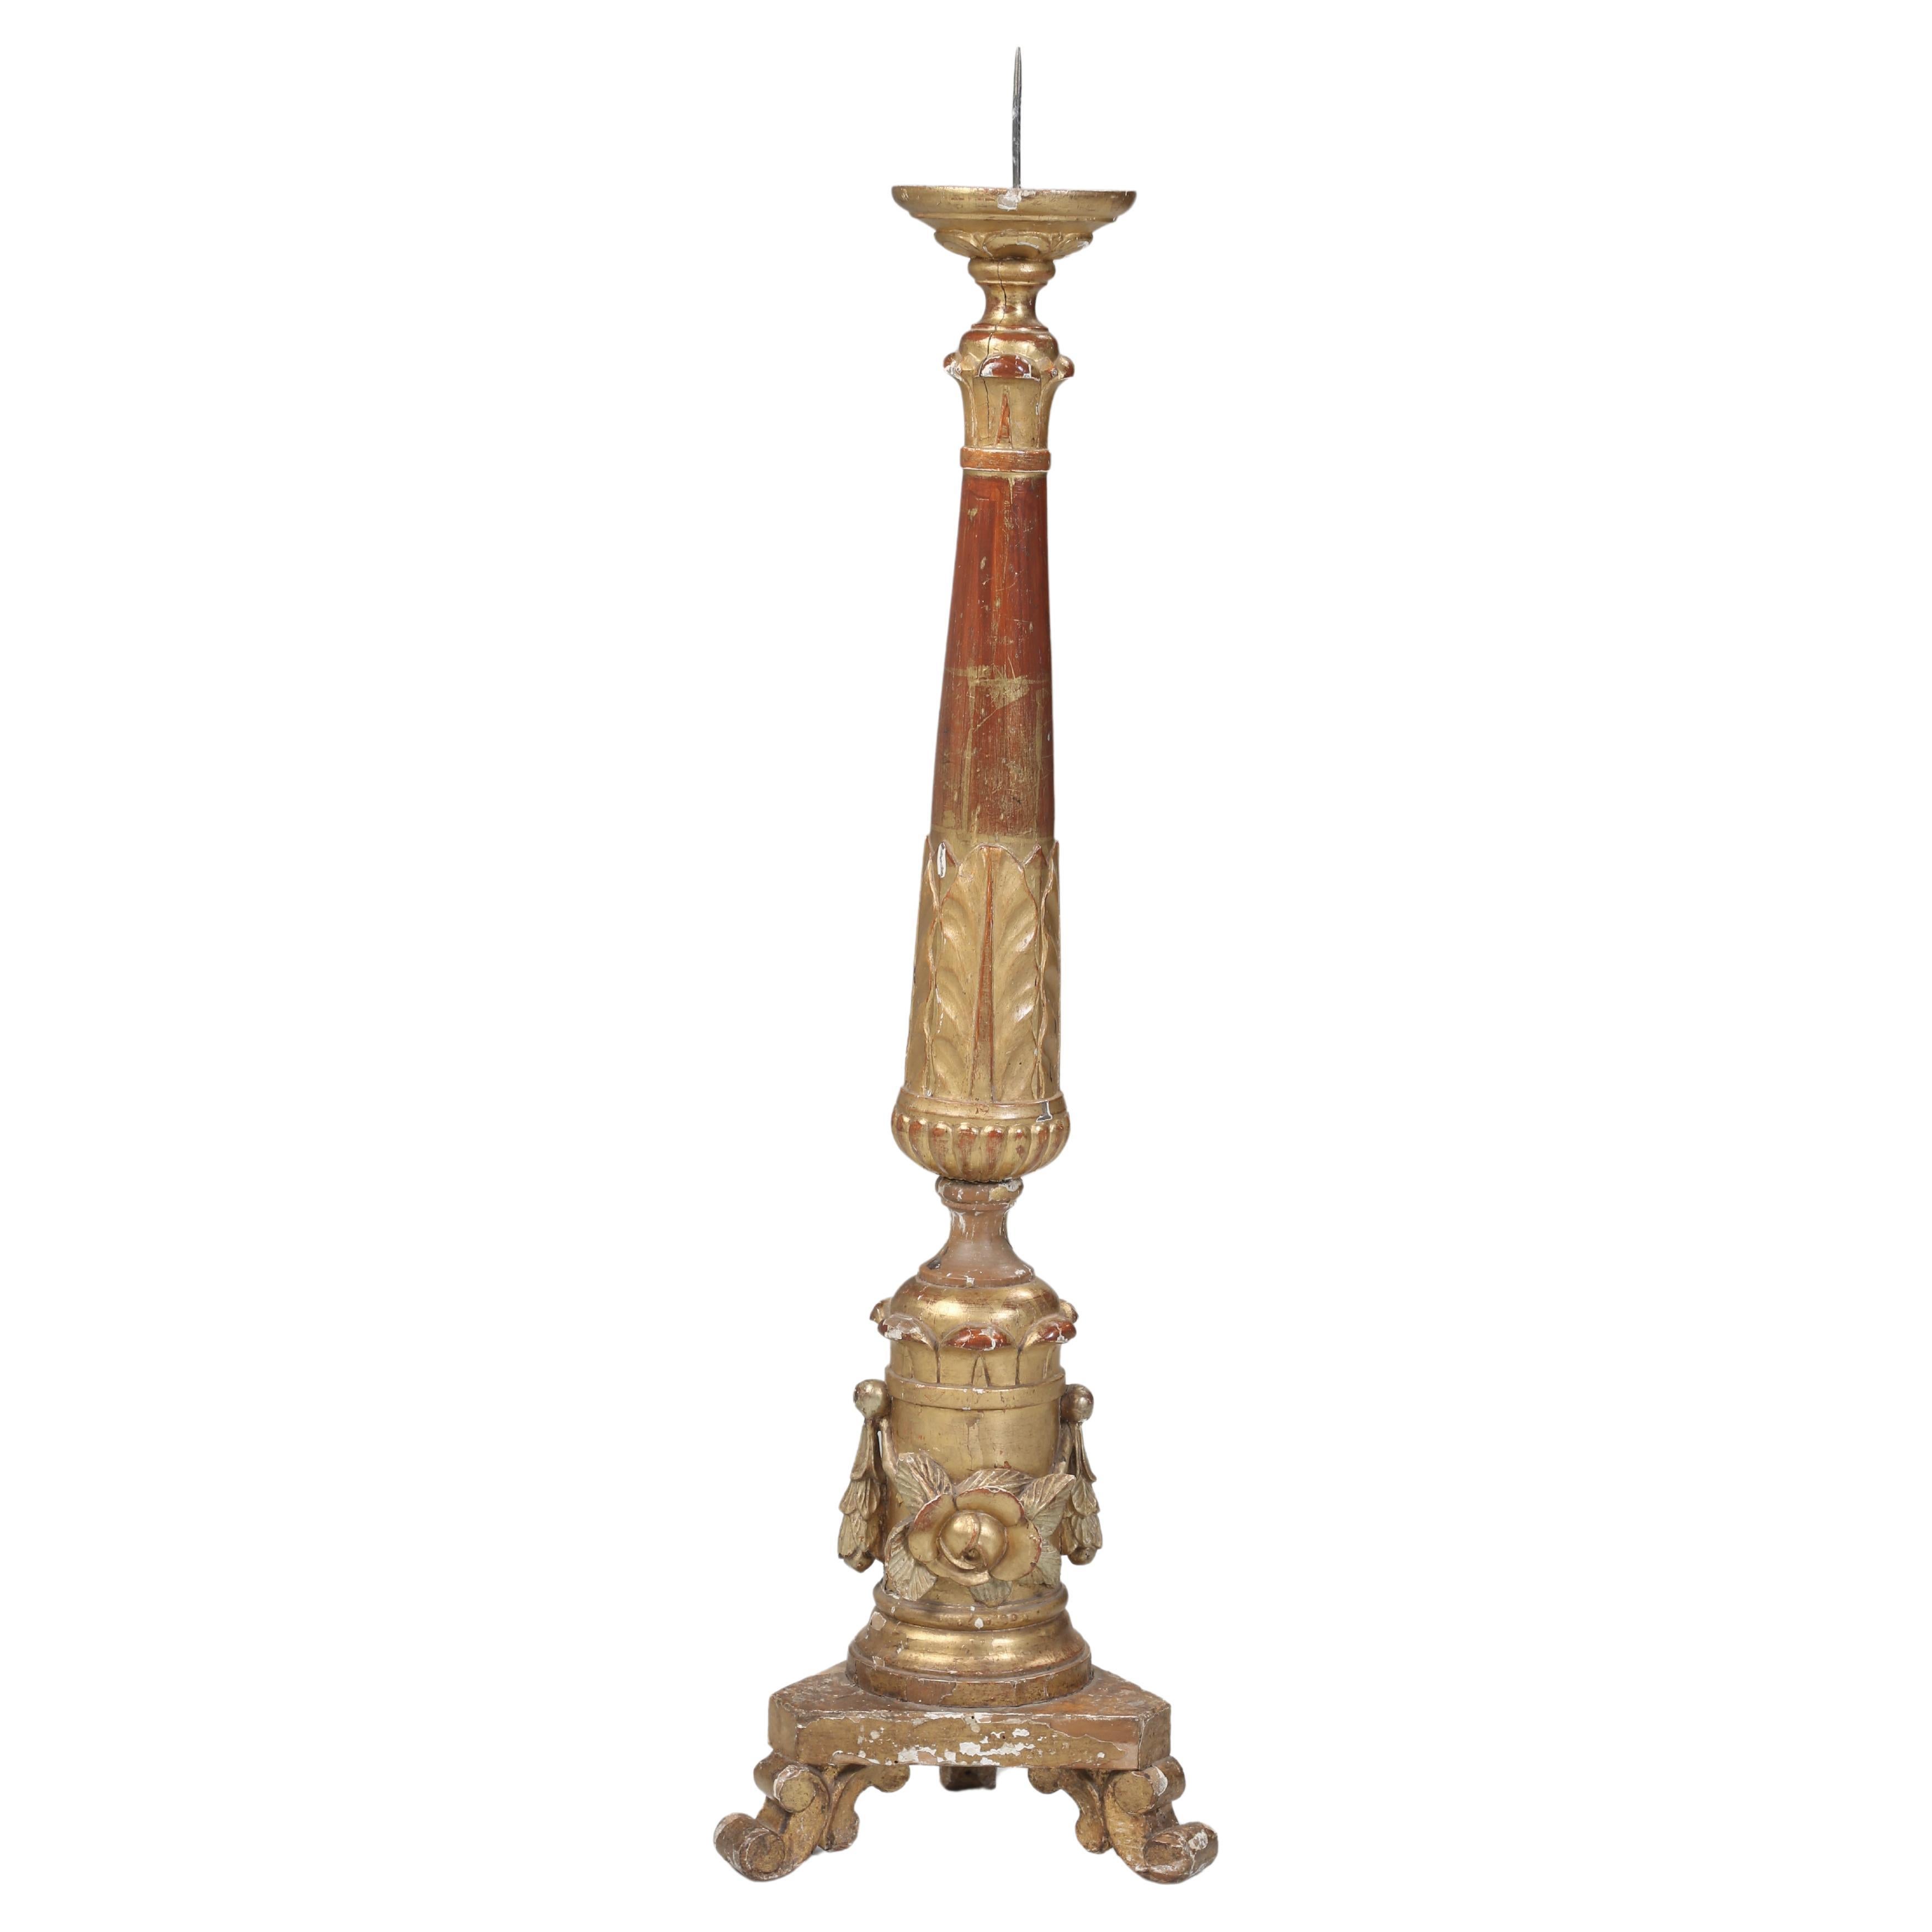 Italian Gilded Altar Candlestick Completely Original and Unrestored c1780-1820 For Sale